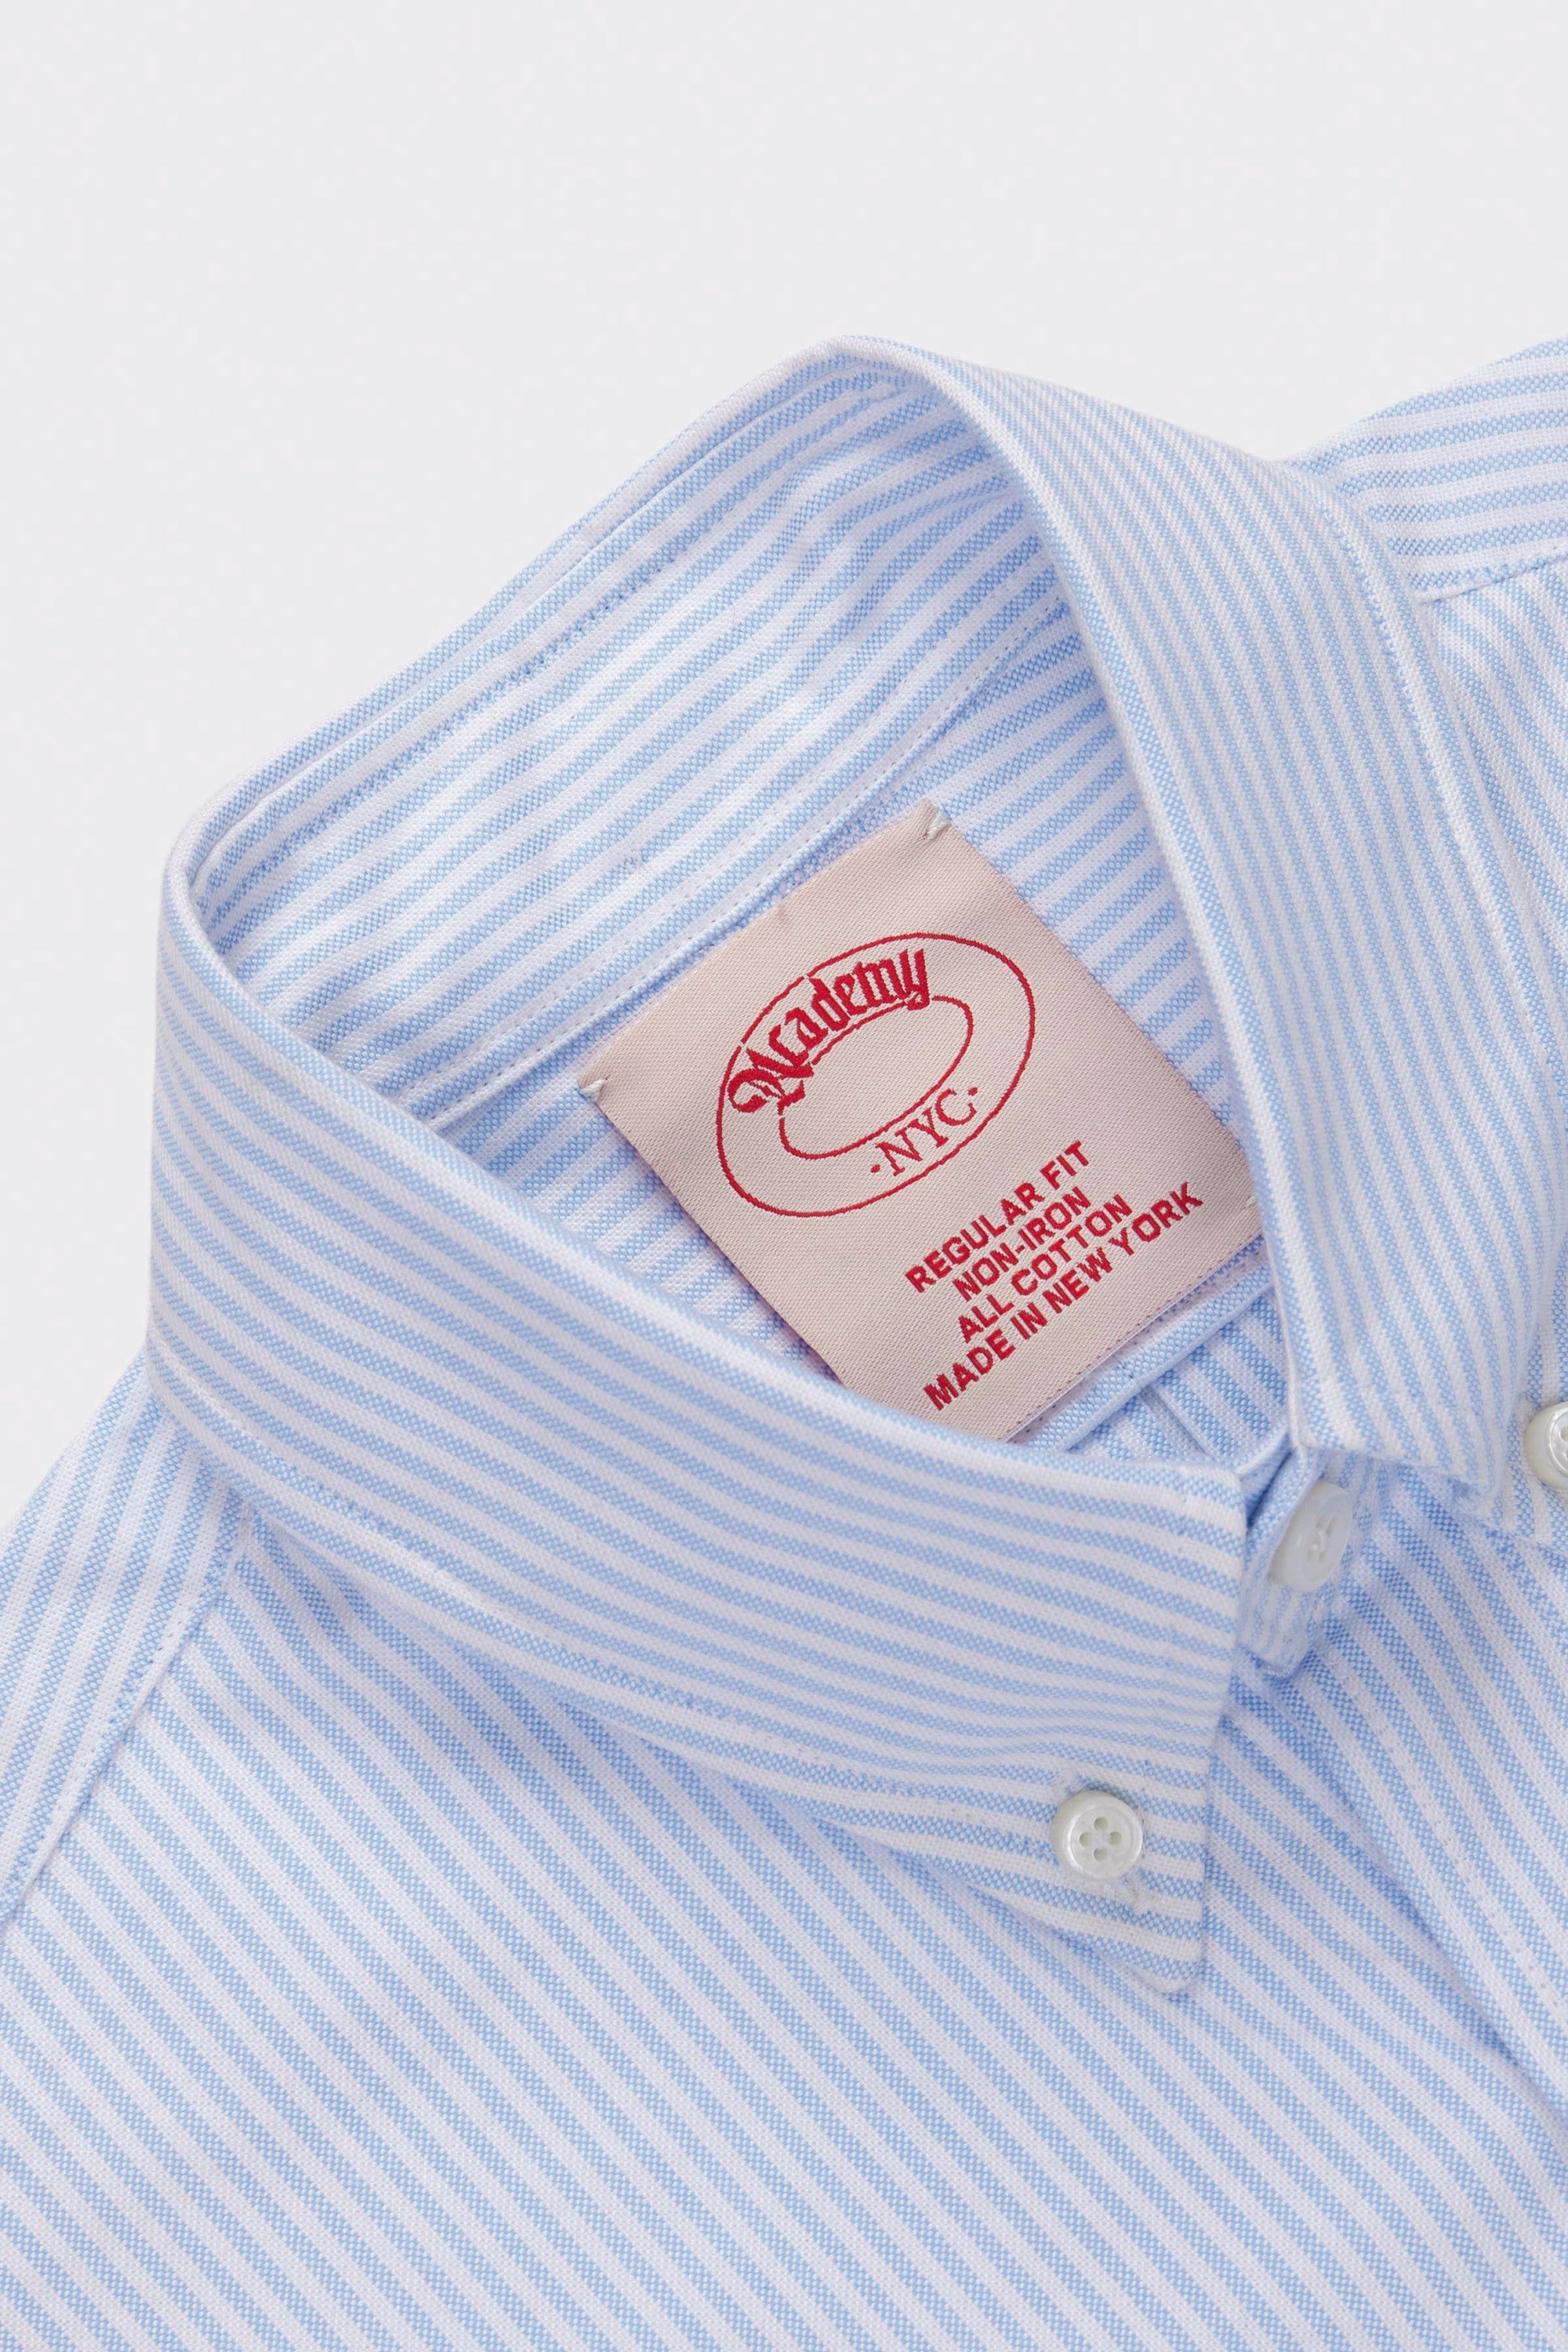 The Standard Issue Oxford, Blue Stripe